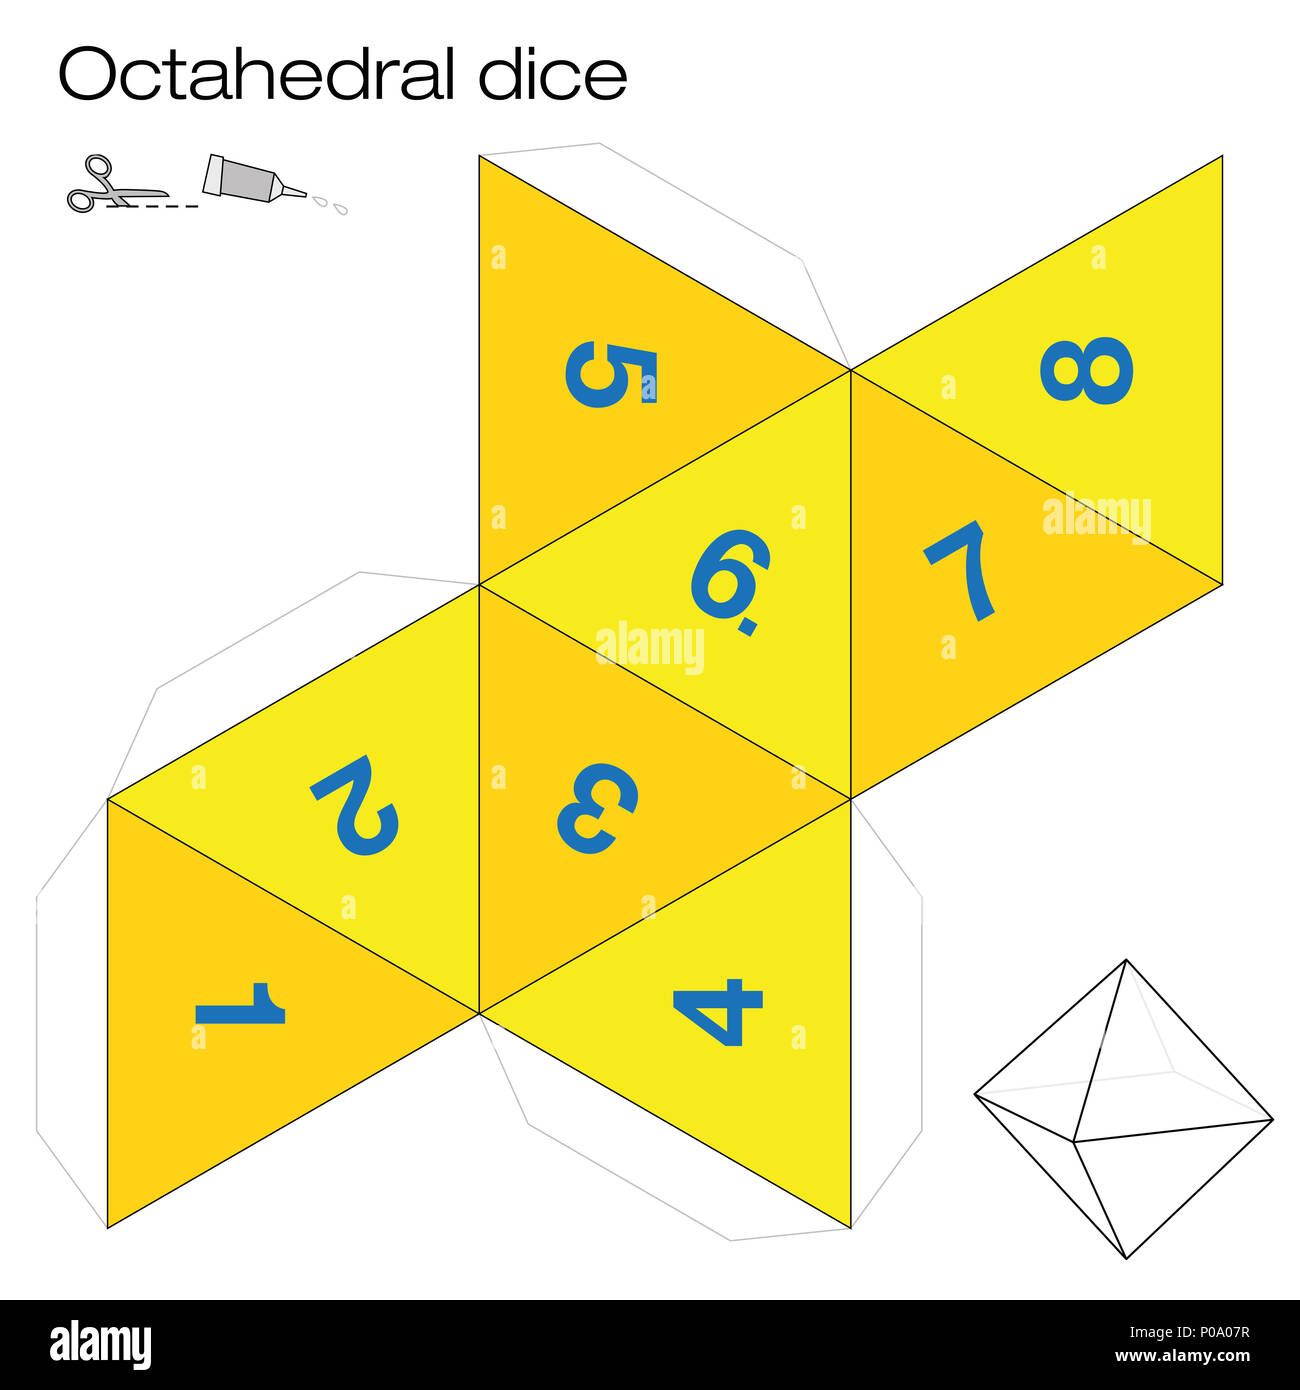 Octahedron template, octahedral dice - one of the five platonic solids - make a 3d item with eight sides out of the net and play dice. Stock Photo